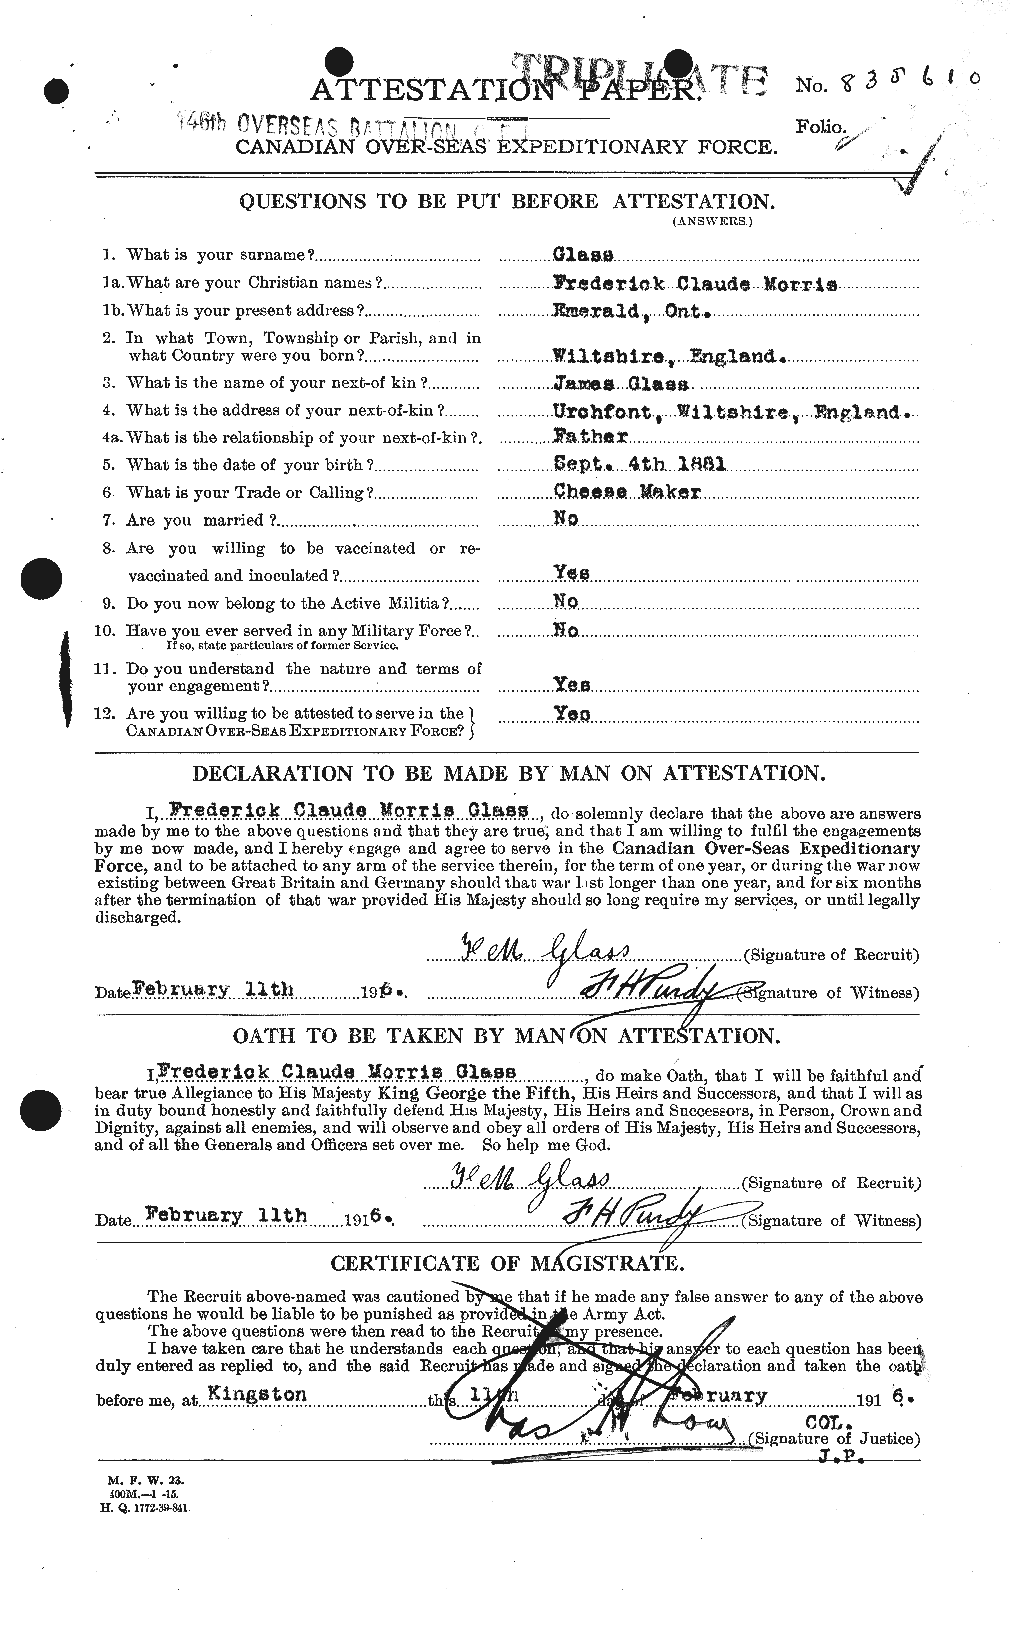 Personnel Records of the First World War - CEF 352044a